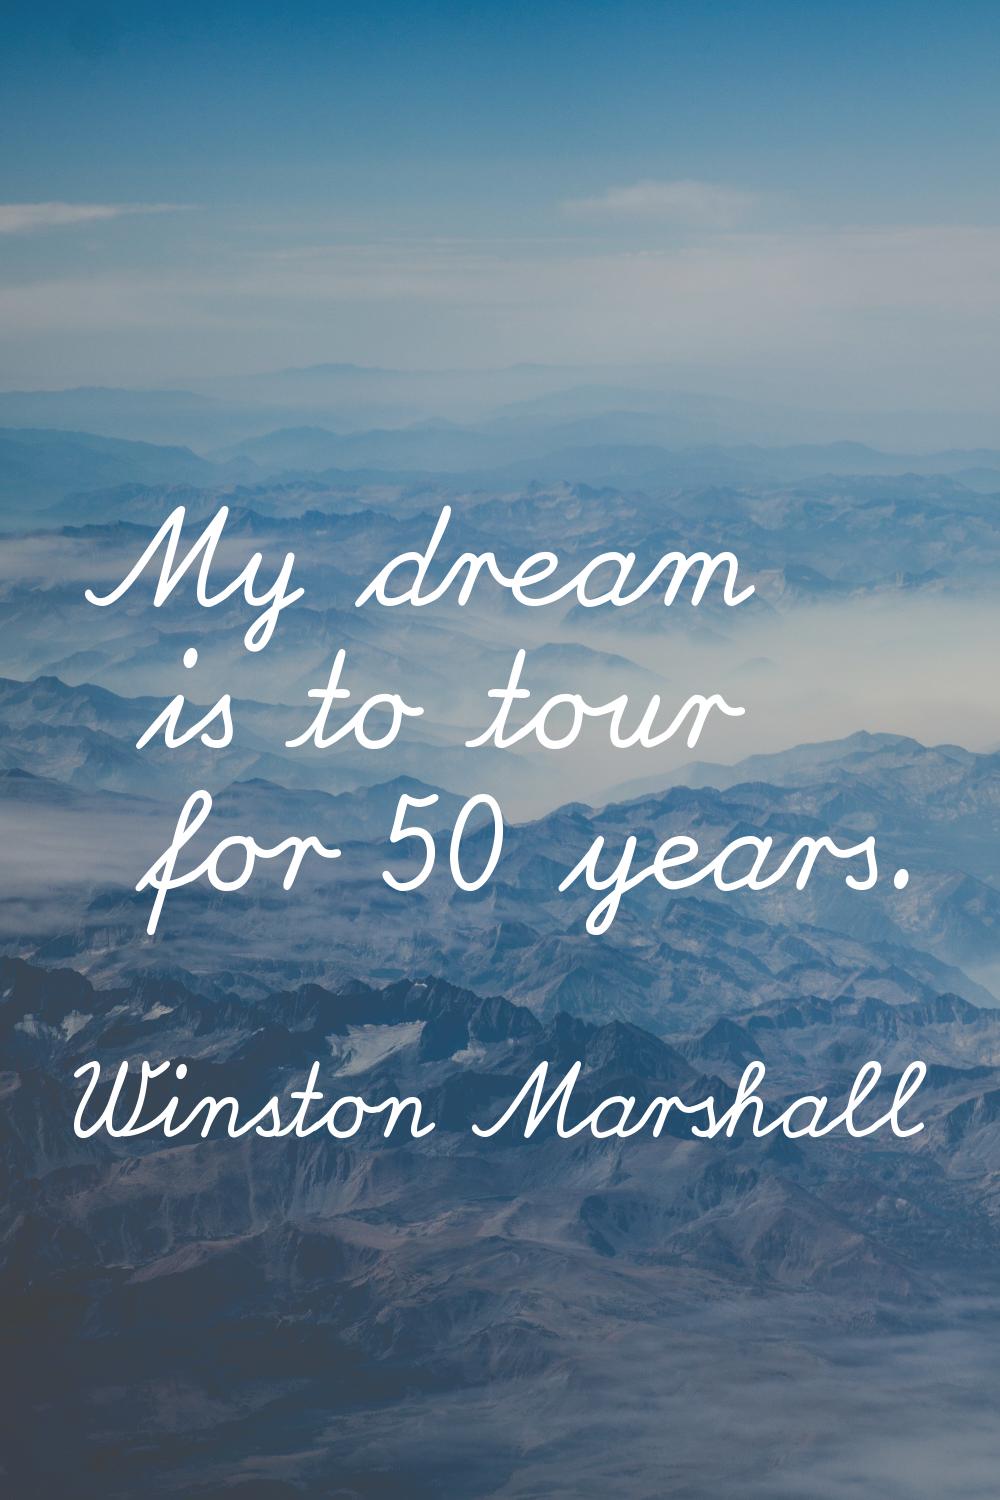 My dream is to tour for 50 years.